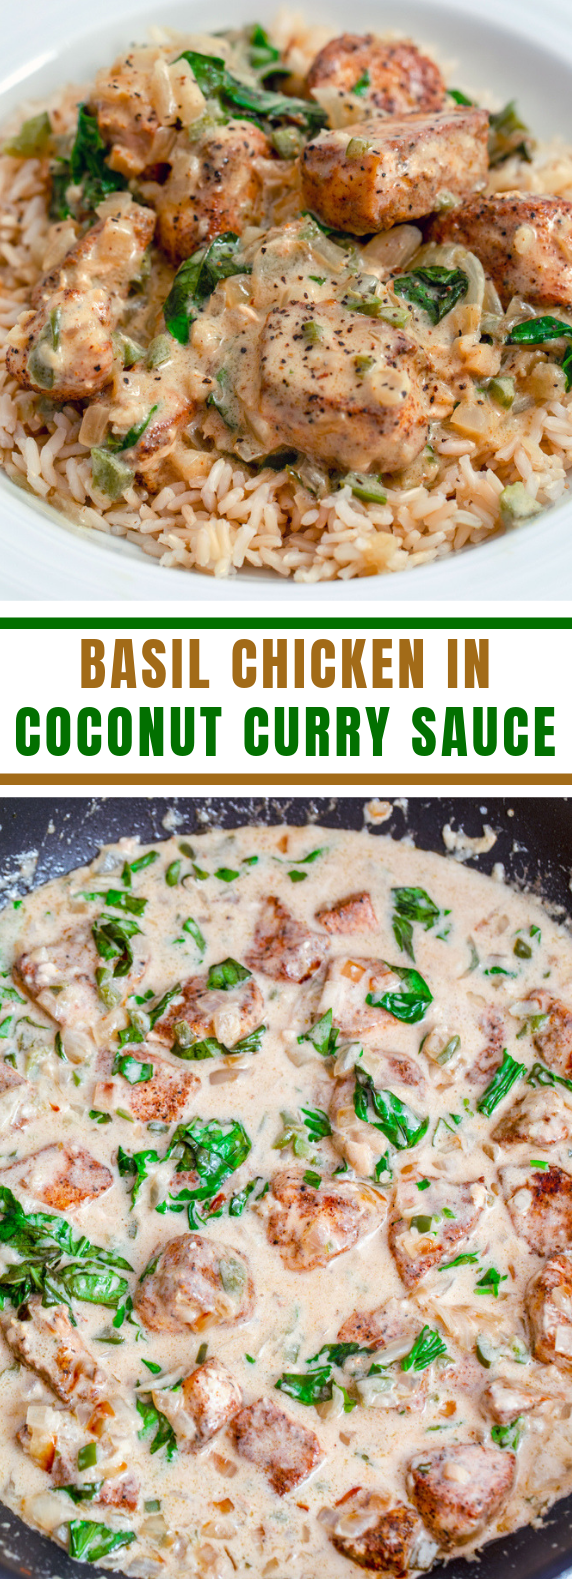 Basil Chicken in Coconut Curry Sauce #dinner #easyrecipe